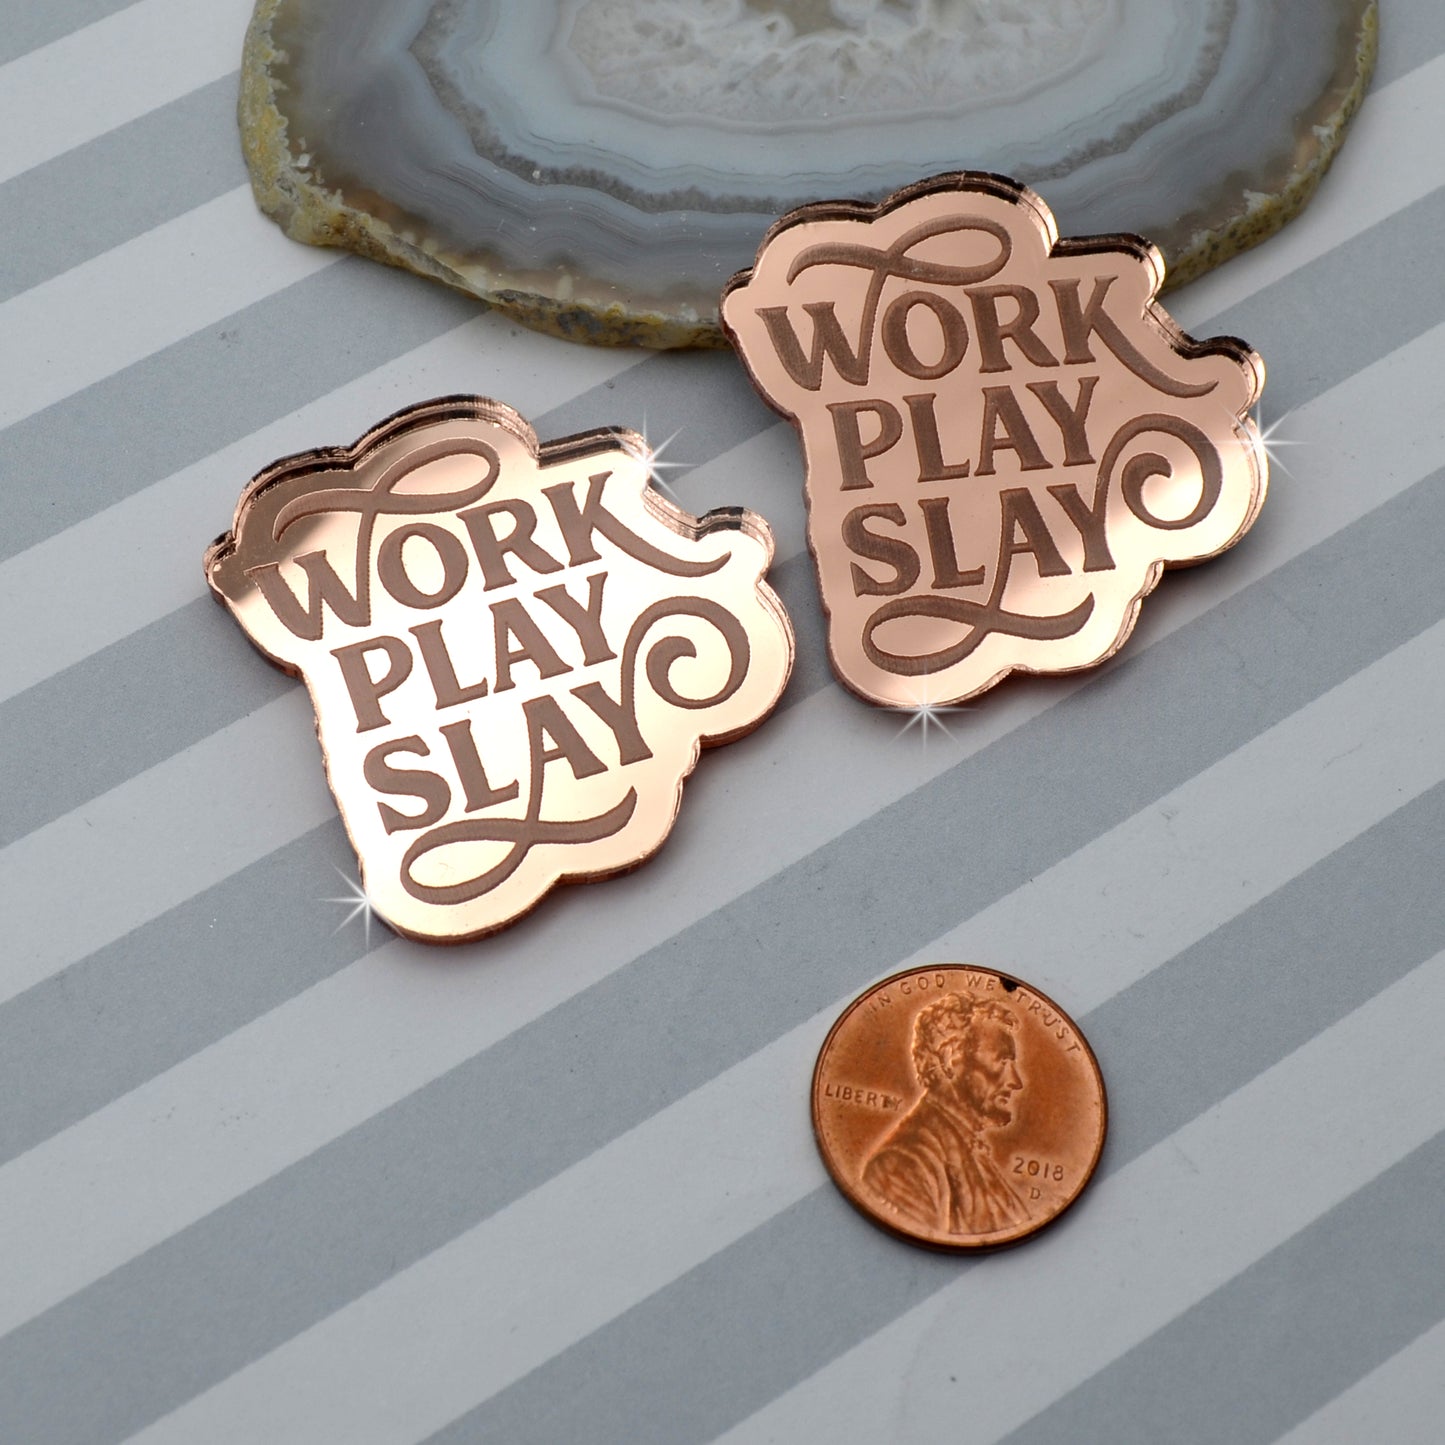 WORK PLAY SLAY - Cabochons- Rose Gold Mirror Laser Cut Acrylic Cabs - Set of 2